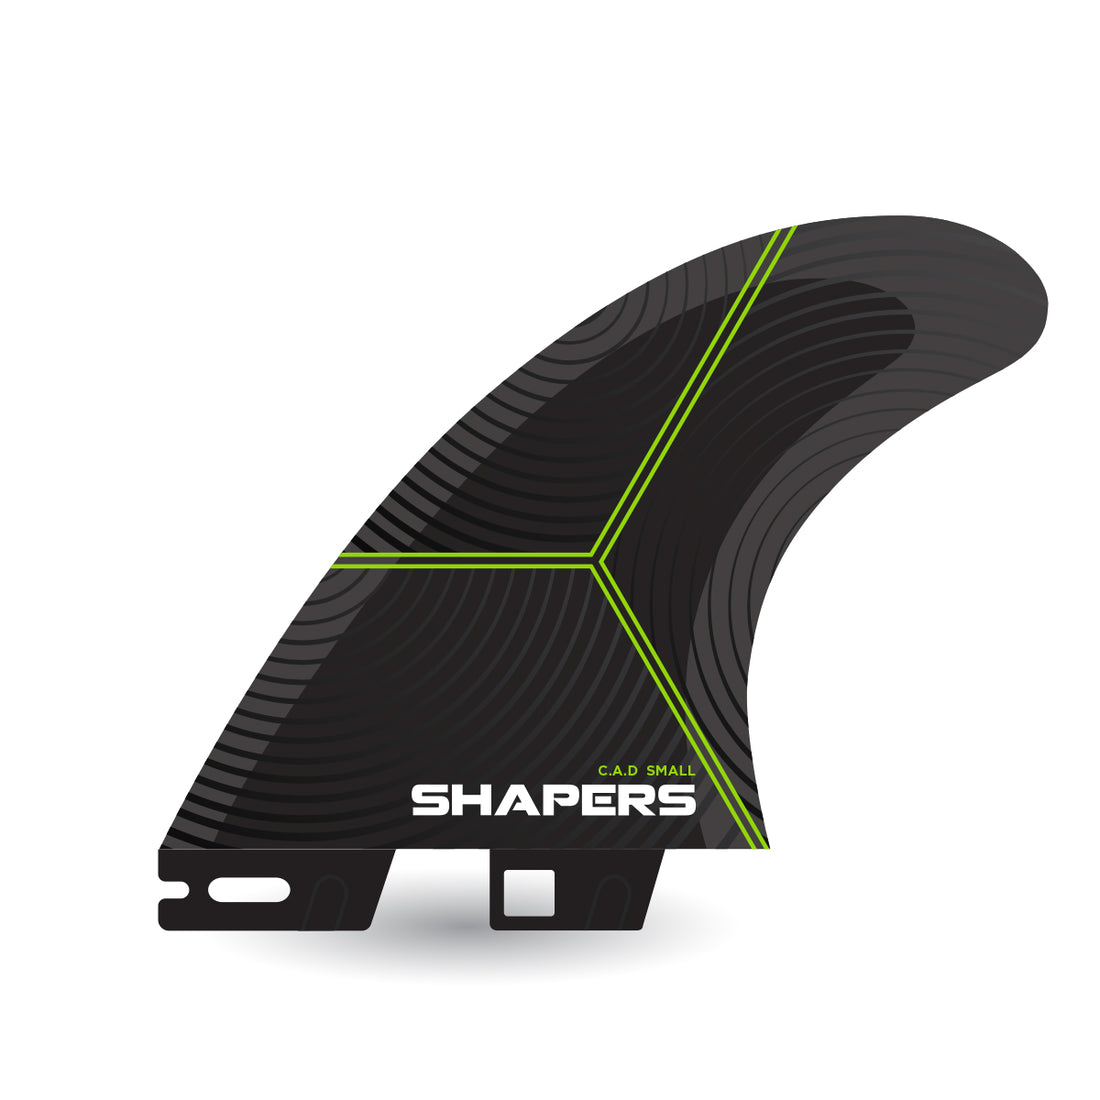 SHAPERS C.A.D SMALL 3-FIN SHAPERS 2 BASE